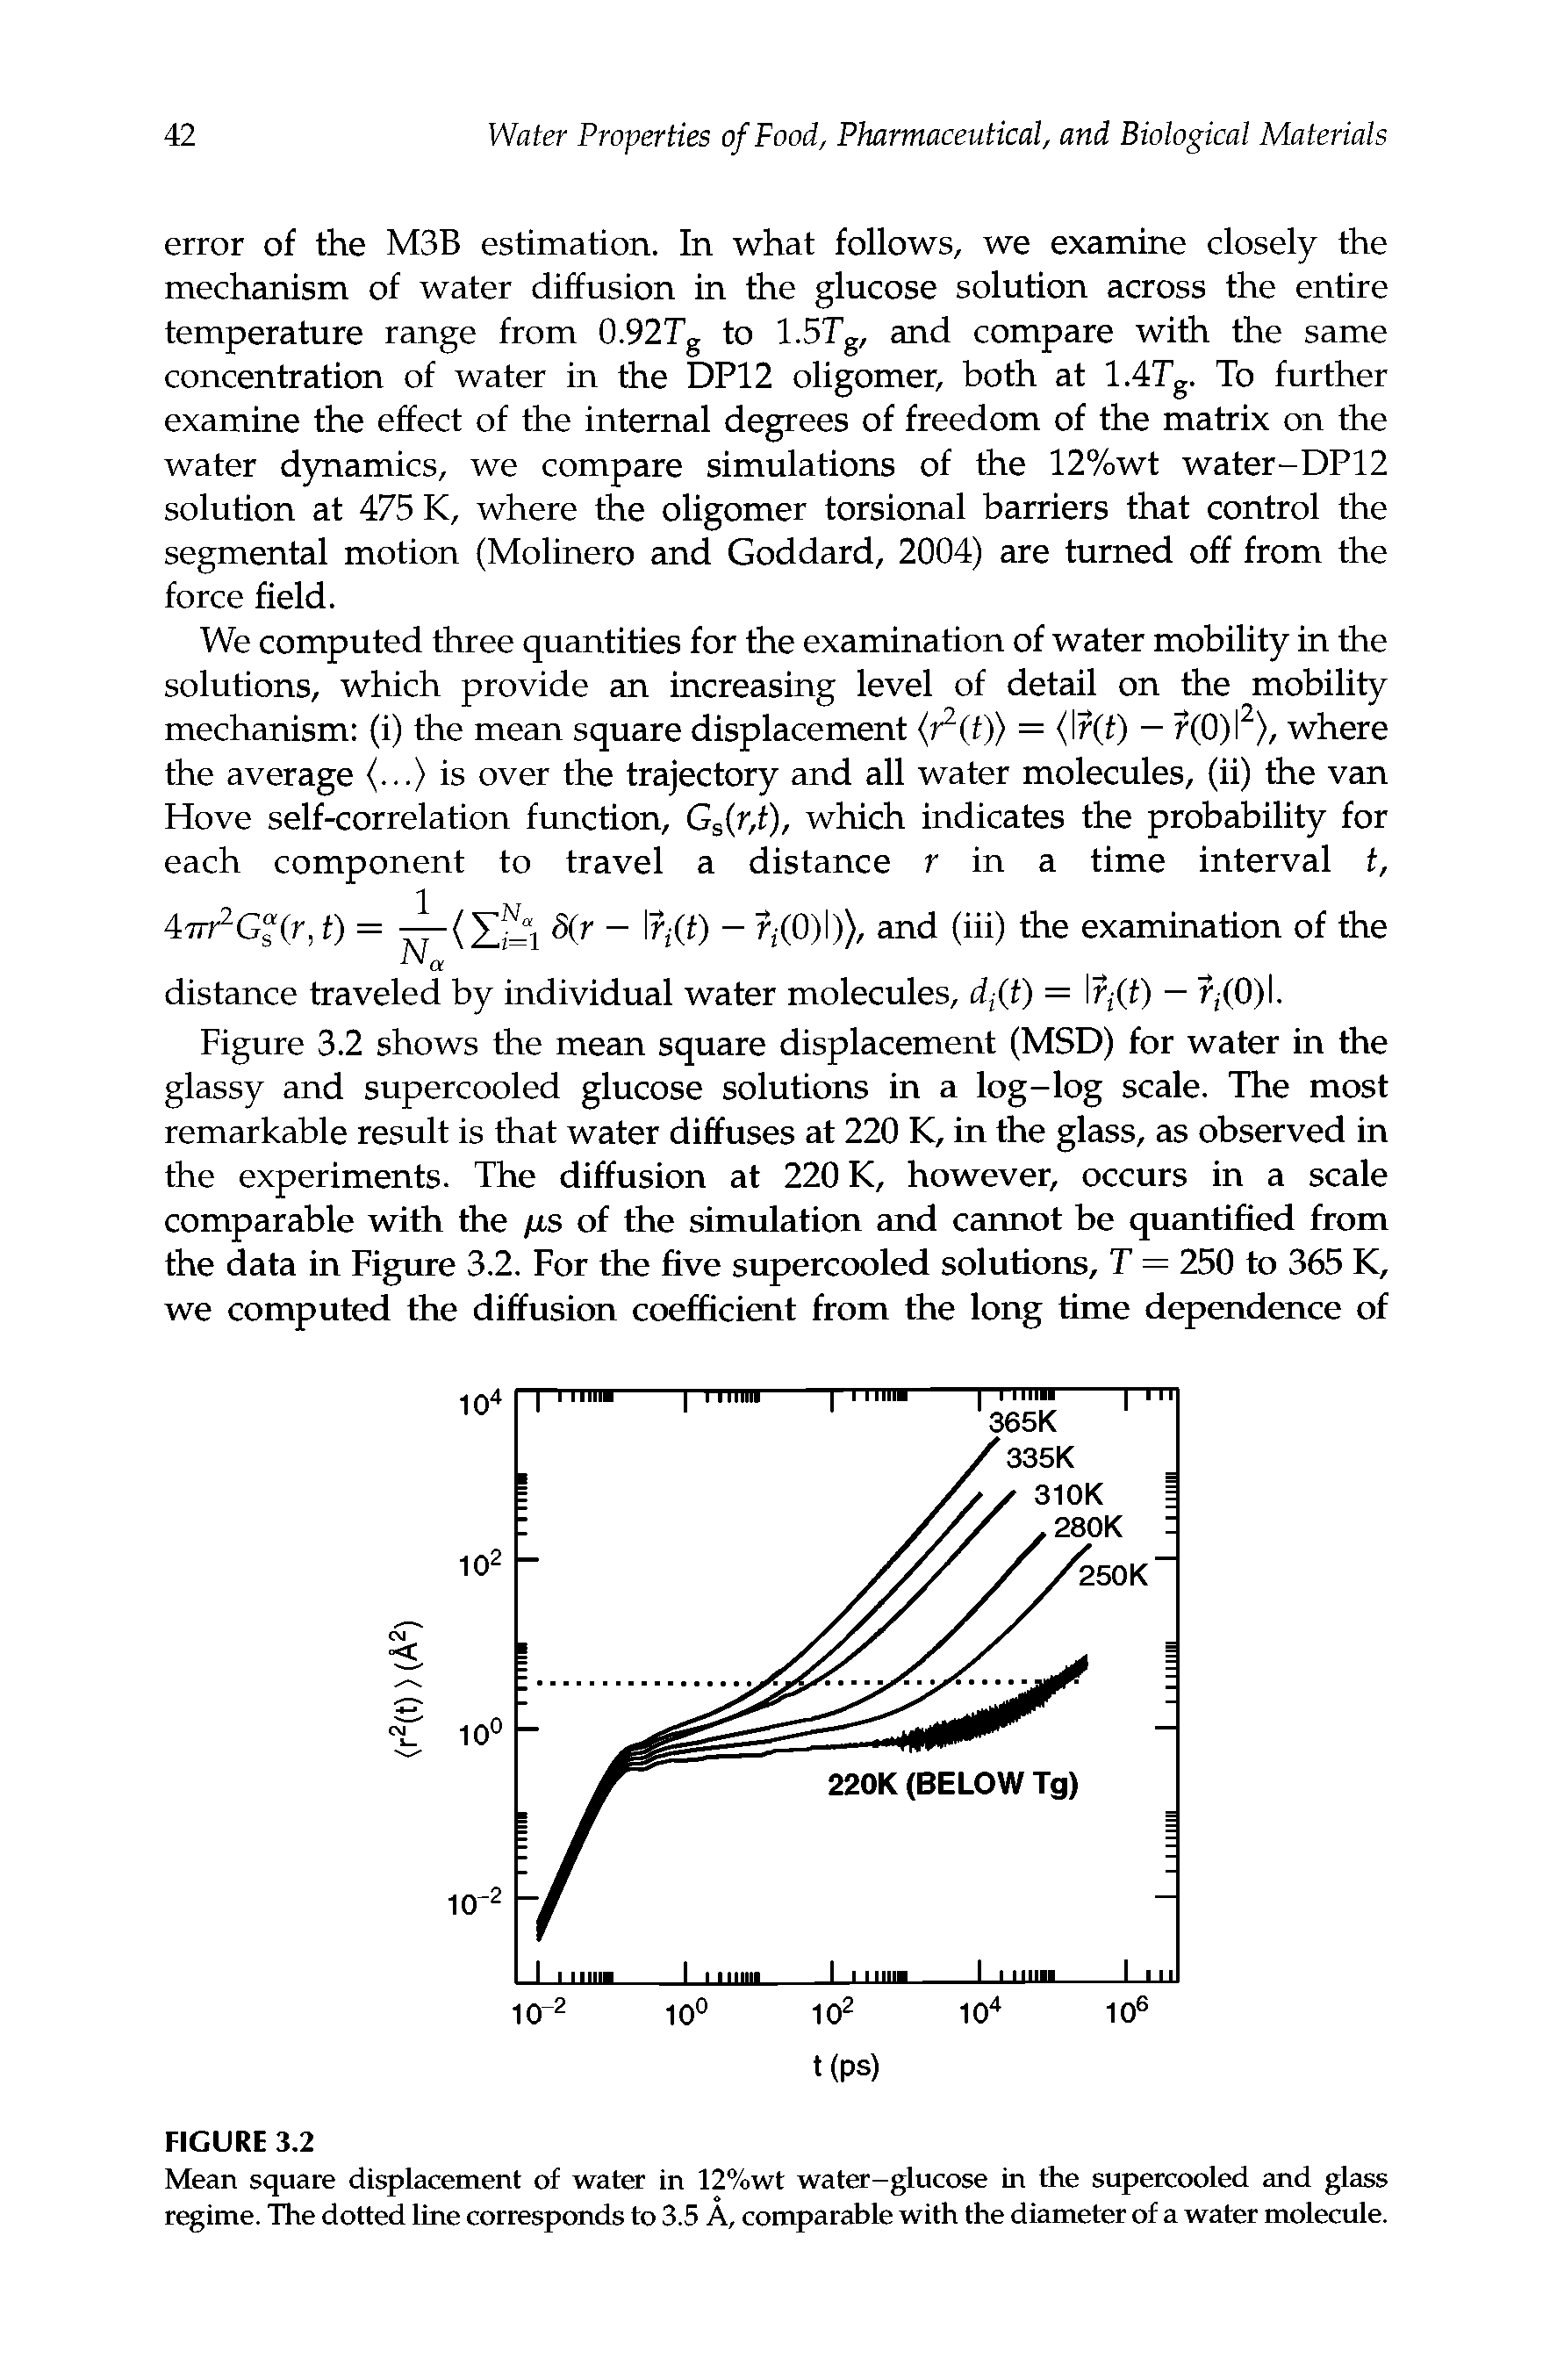 Figure 3.2 shows the mean square displacement (MSD) for water in the glassy and supercooled glucose solutions in a log-log scale. The most remarkable result is that water diffuses at 220 K, in the glass, as observed in the experiments. The diffusion at 220 K, however, occurs in a scale comparable with the /rs of the simulation and cannot be quantified from the data in Figure 3.2. For the five supercooled solutions, T = 250 to 365 K, we computed the diffusion coefficient from the long time dependence of...